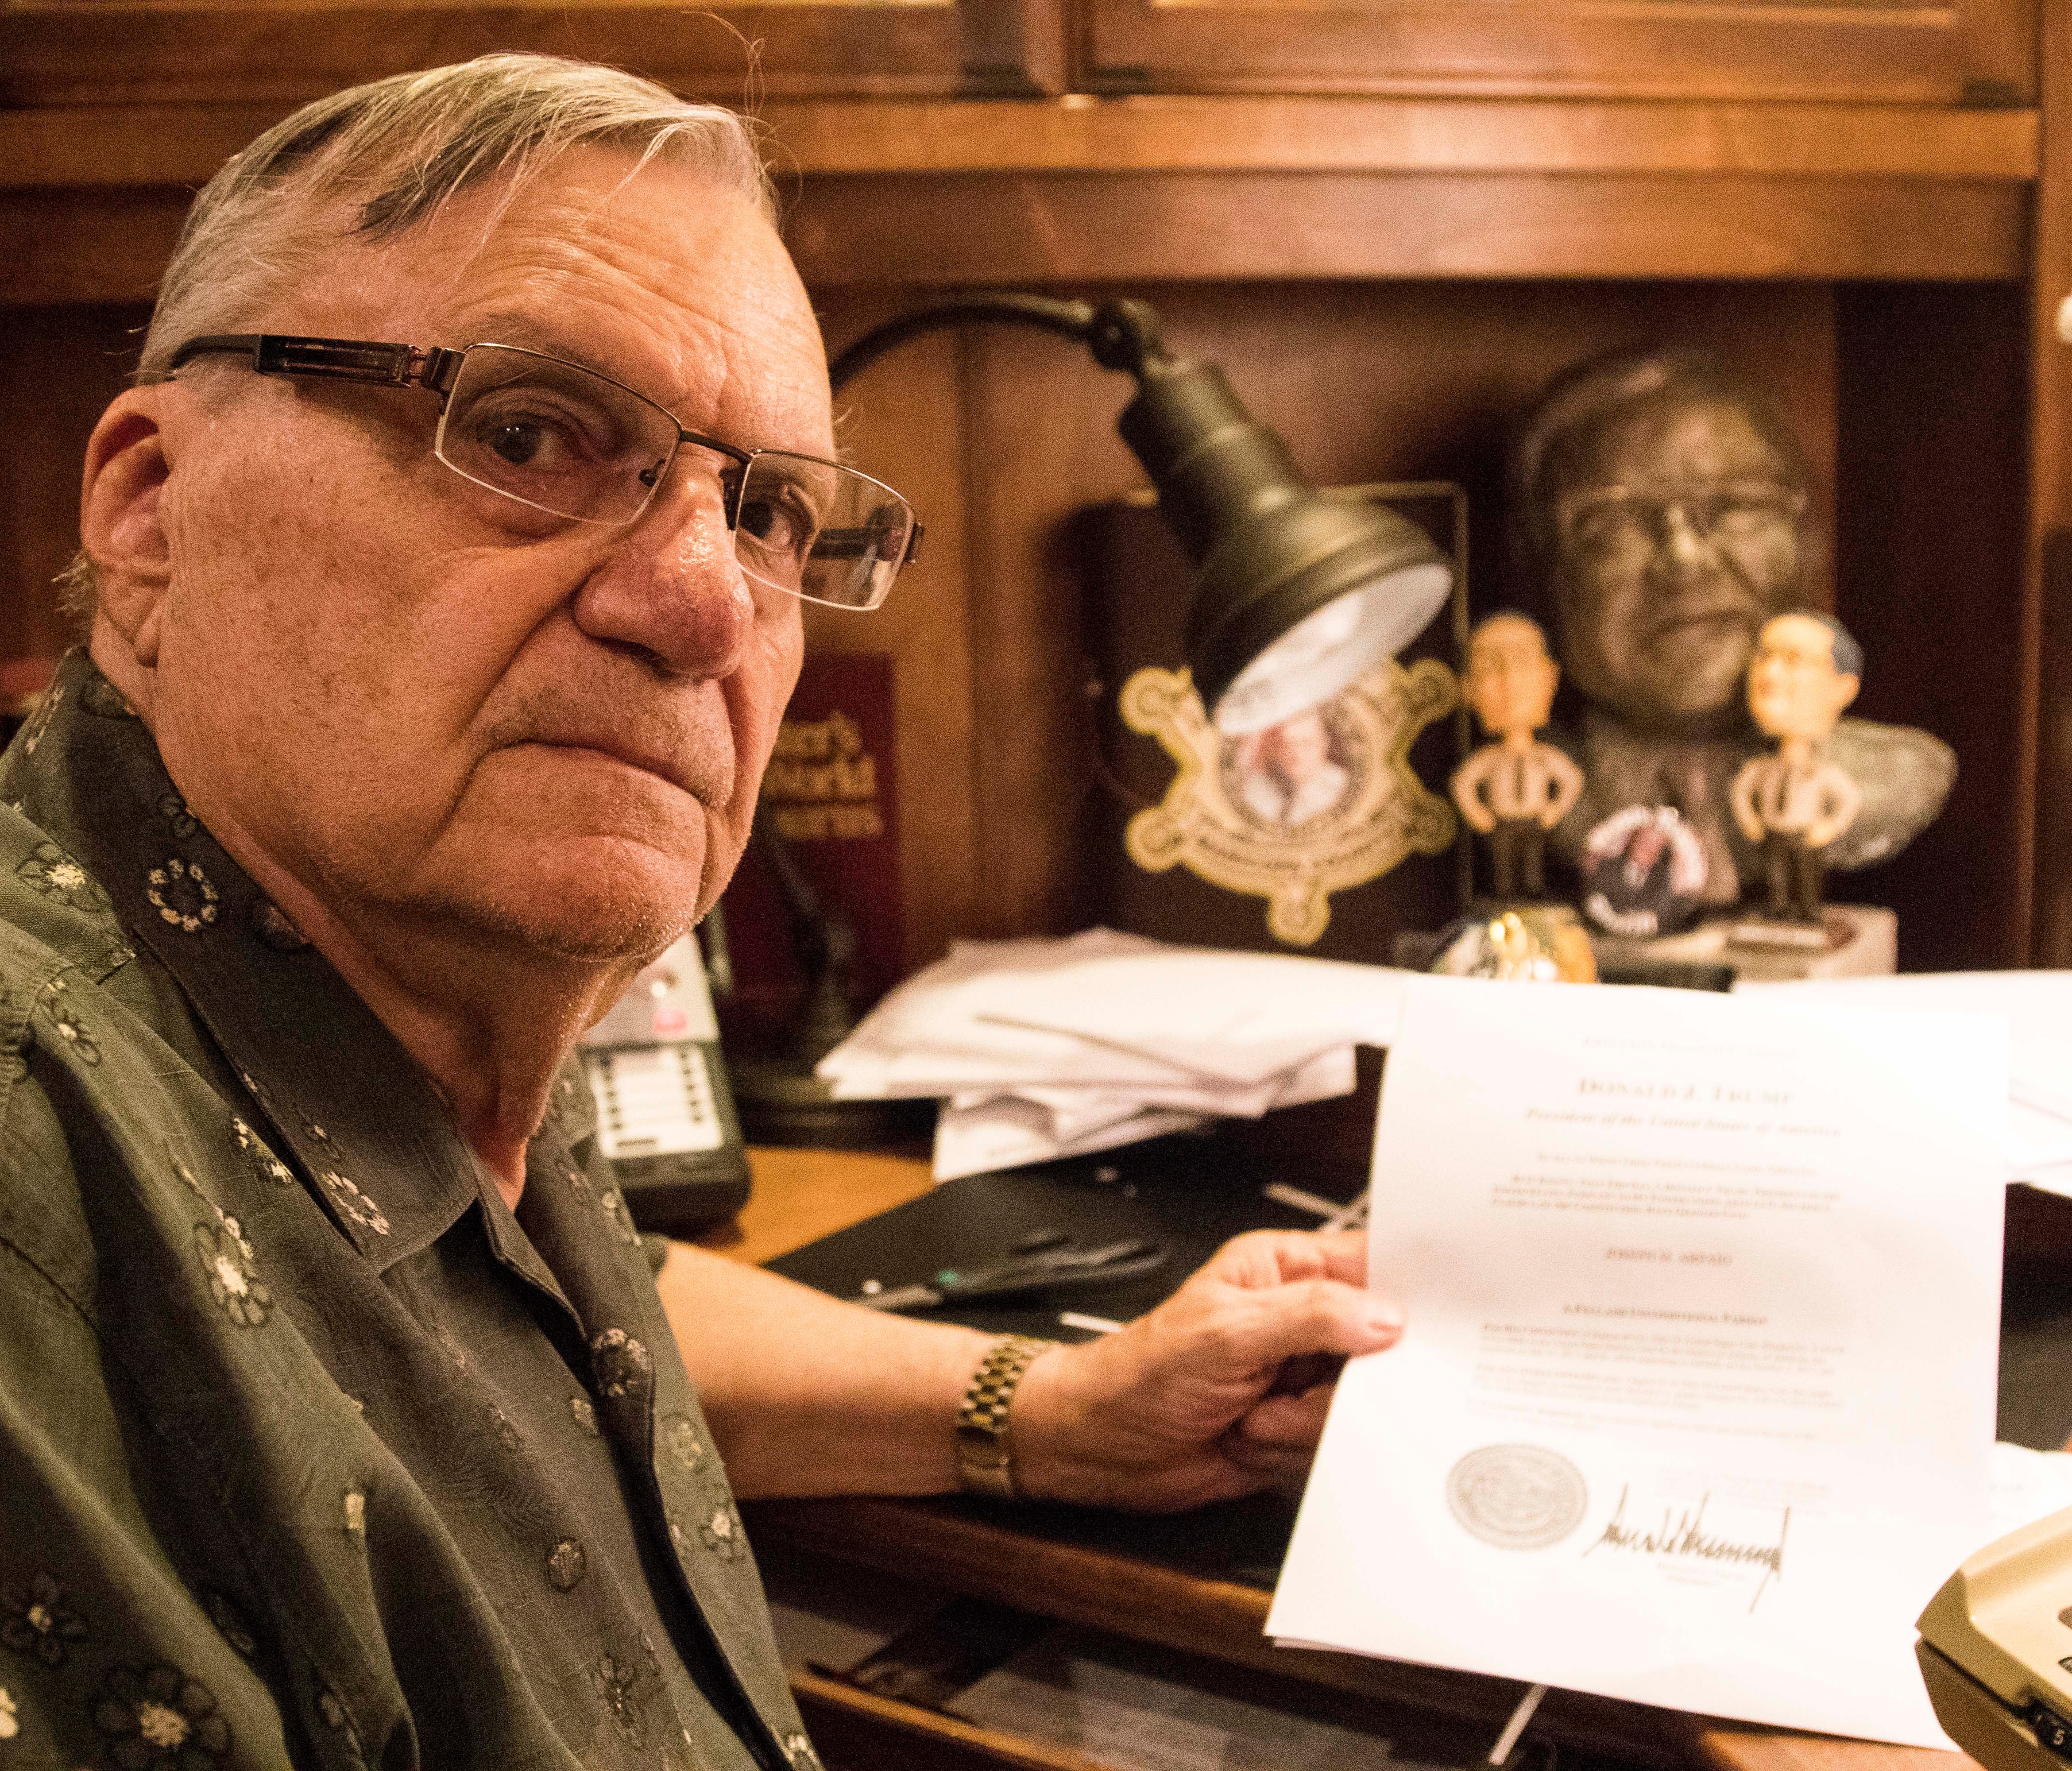 Former Sheriff Joe Arpaio speaks to the Arizona Republic about his pardon received from President Donald Trump.